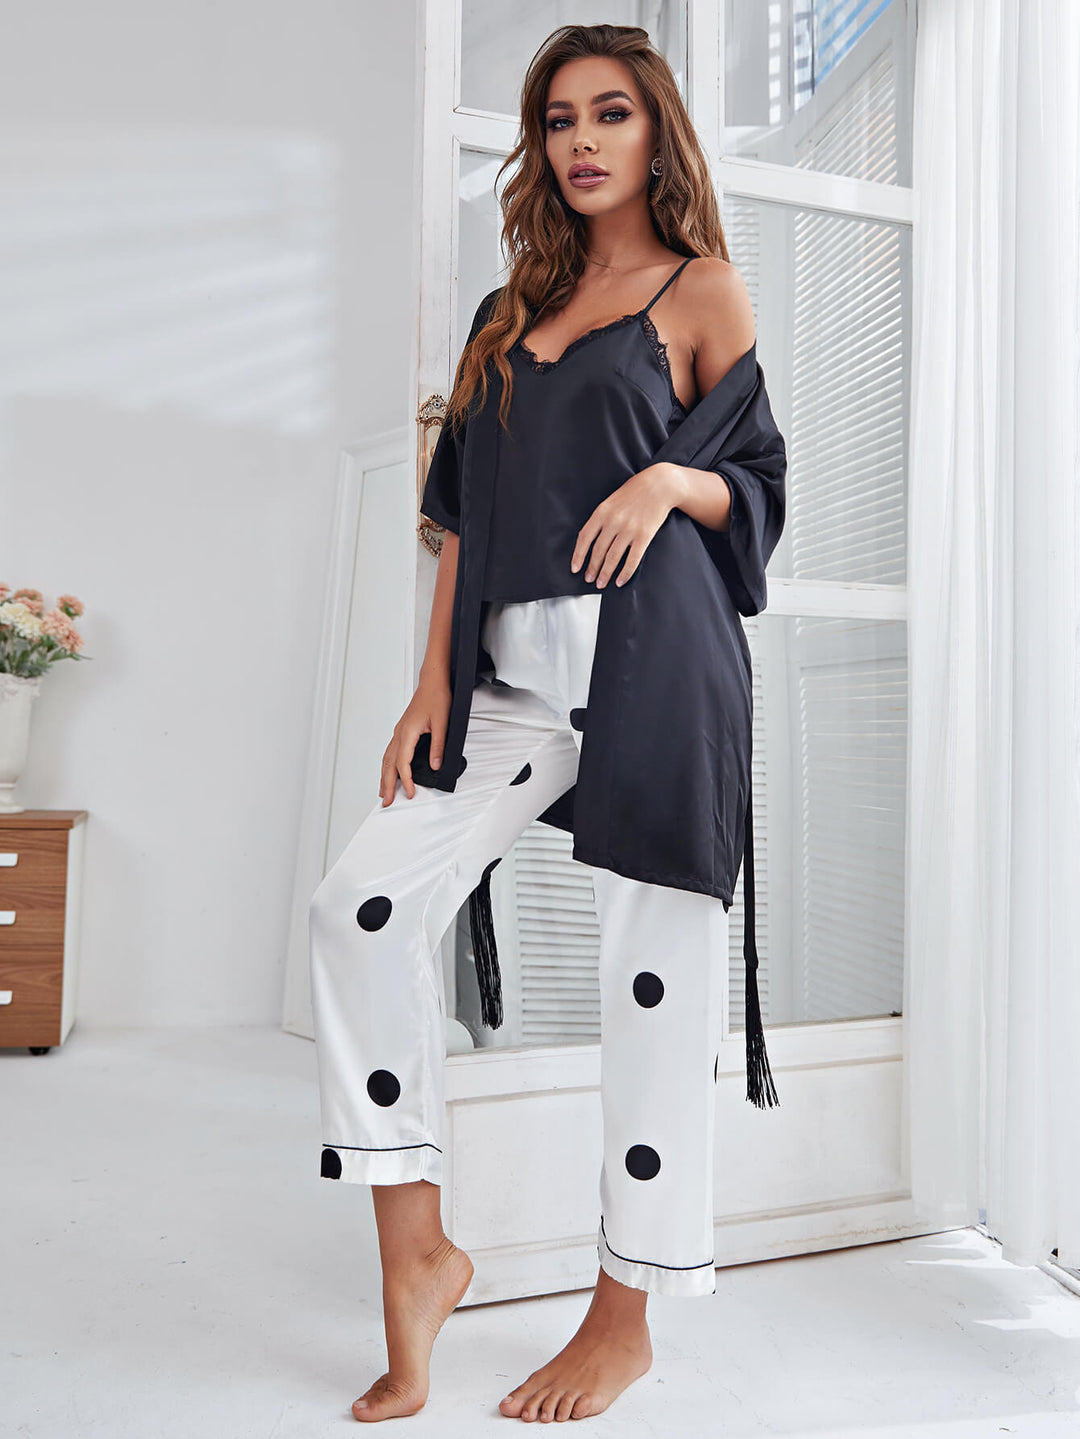 The Cozy Camisole, Robe, and Printed Pant Lounge Set